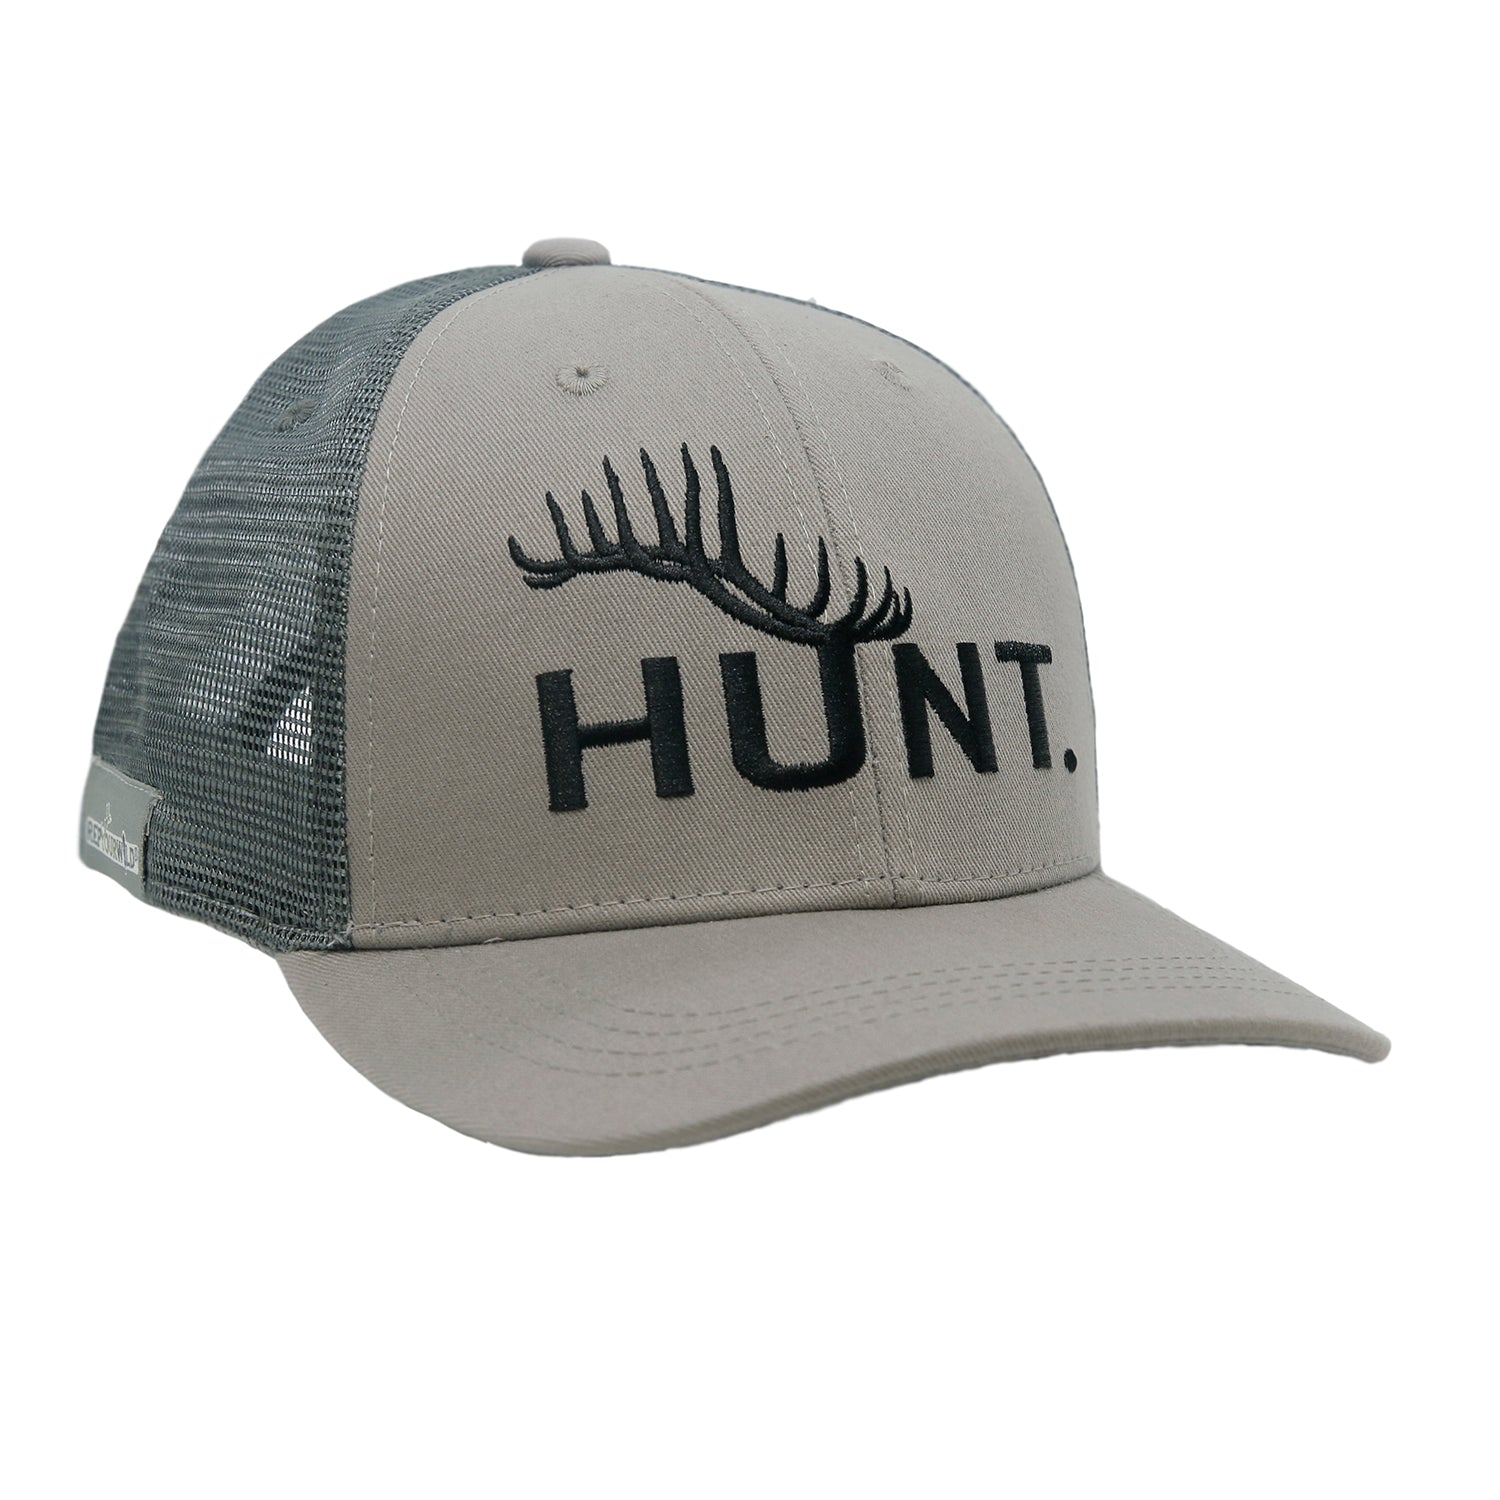 A hat with black mesh and gray front has the word HUNT with elk antlers on top of the U